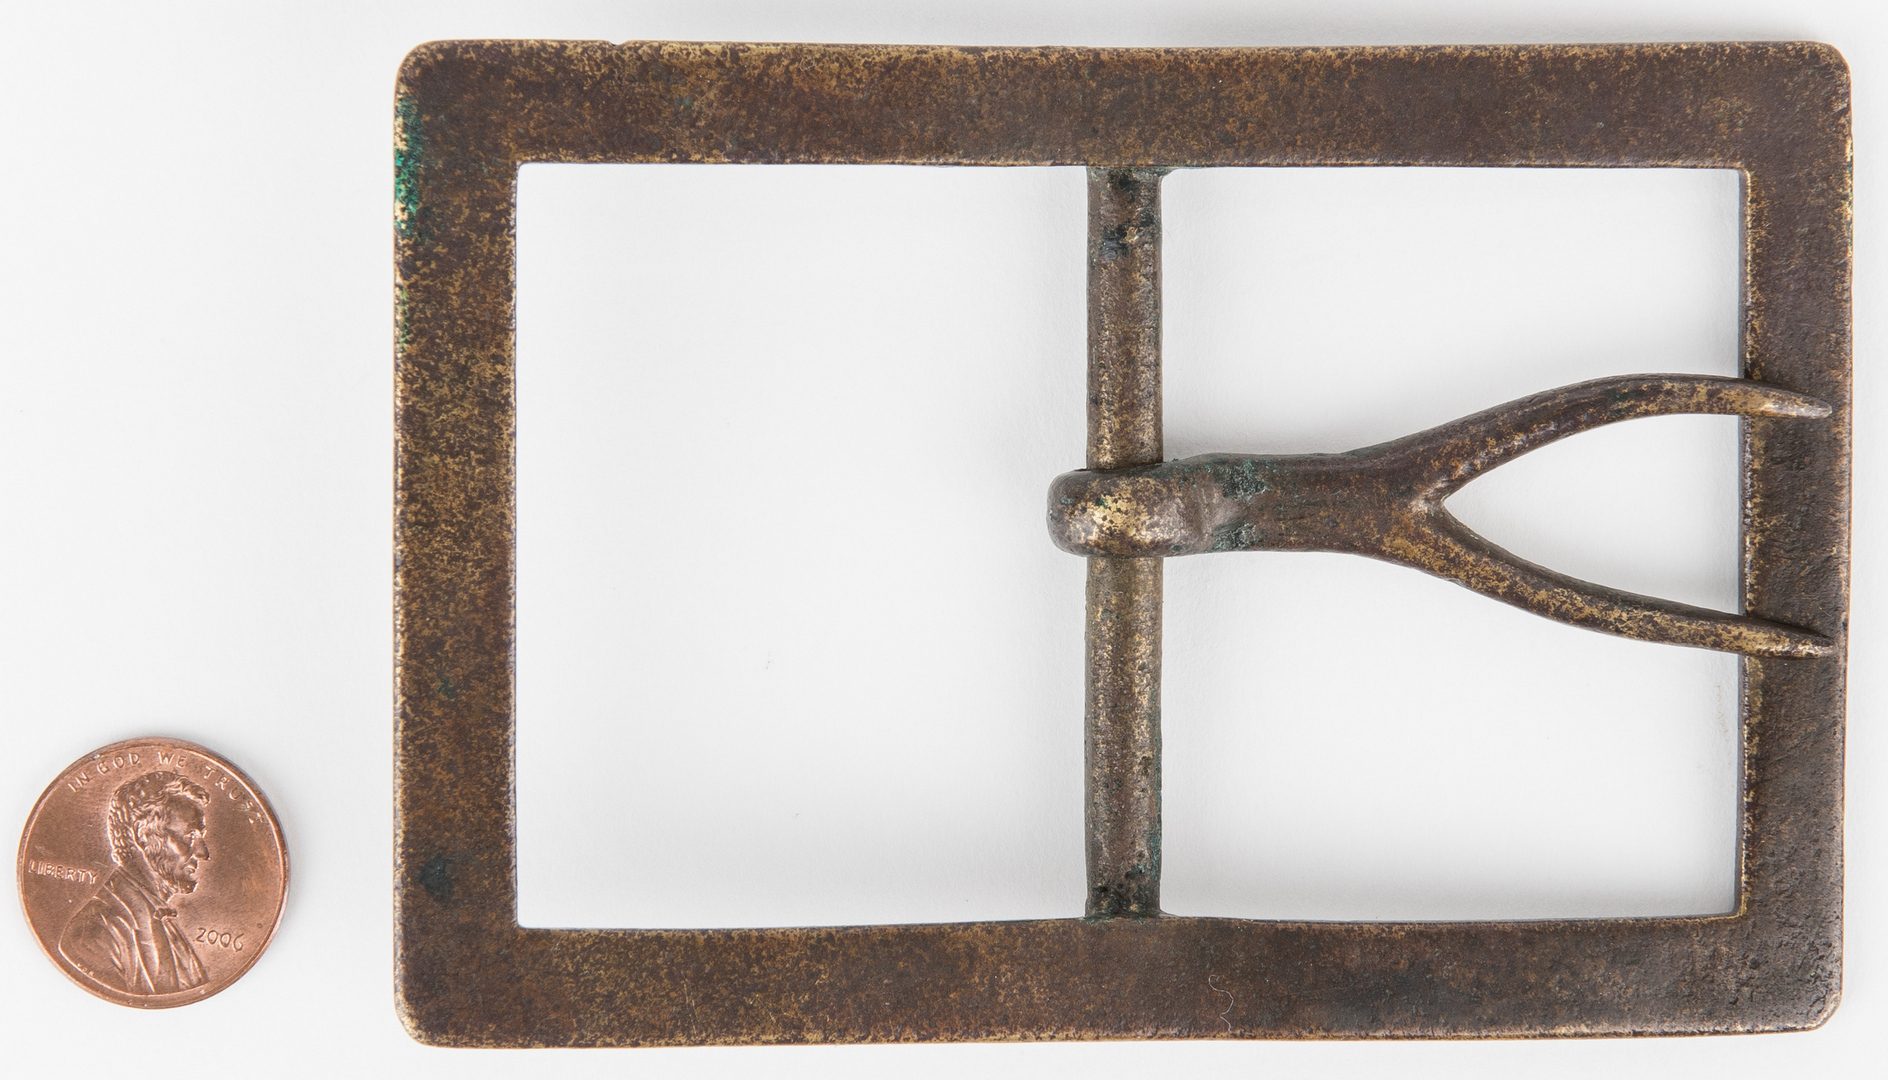 Lot 273: 2 Confederate Frame Buckles, incl. Forked Tongue, Beveled Edge